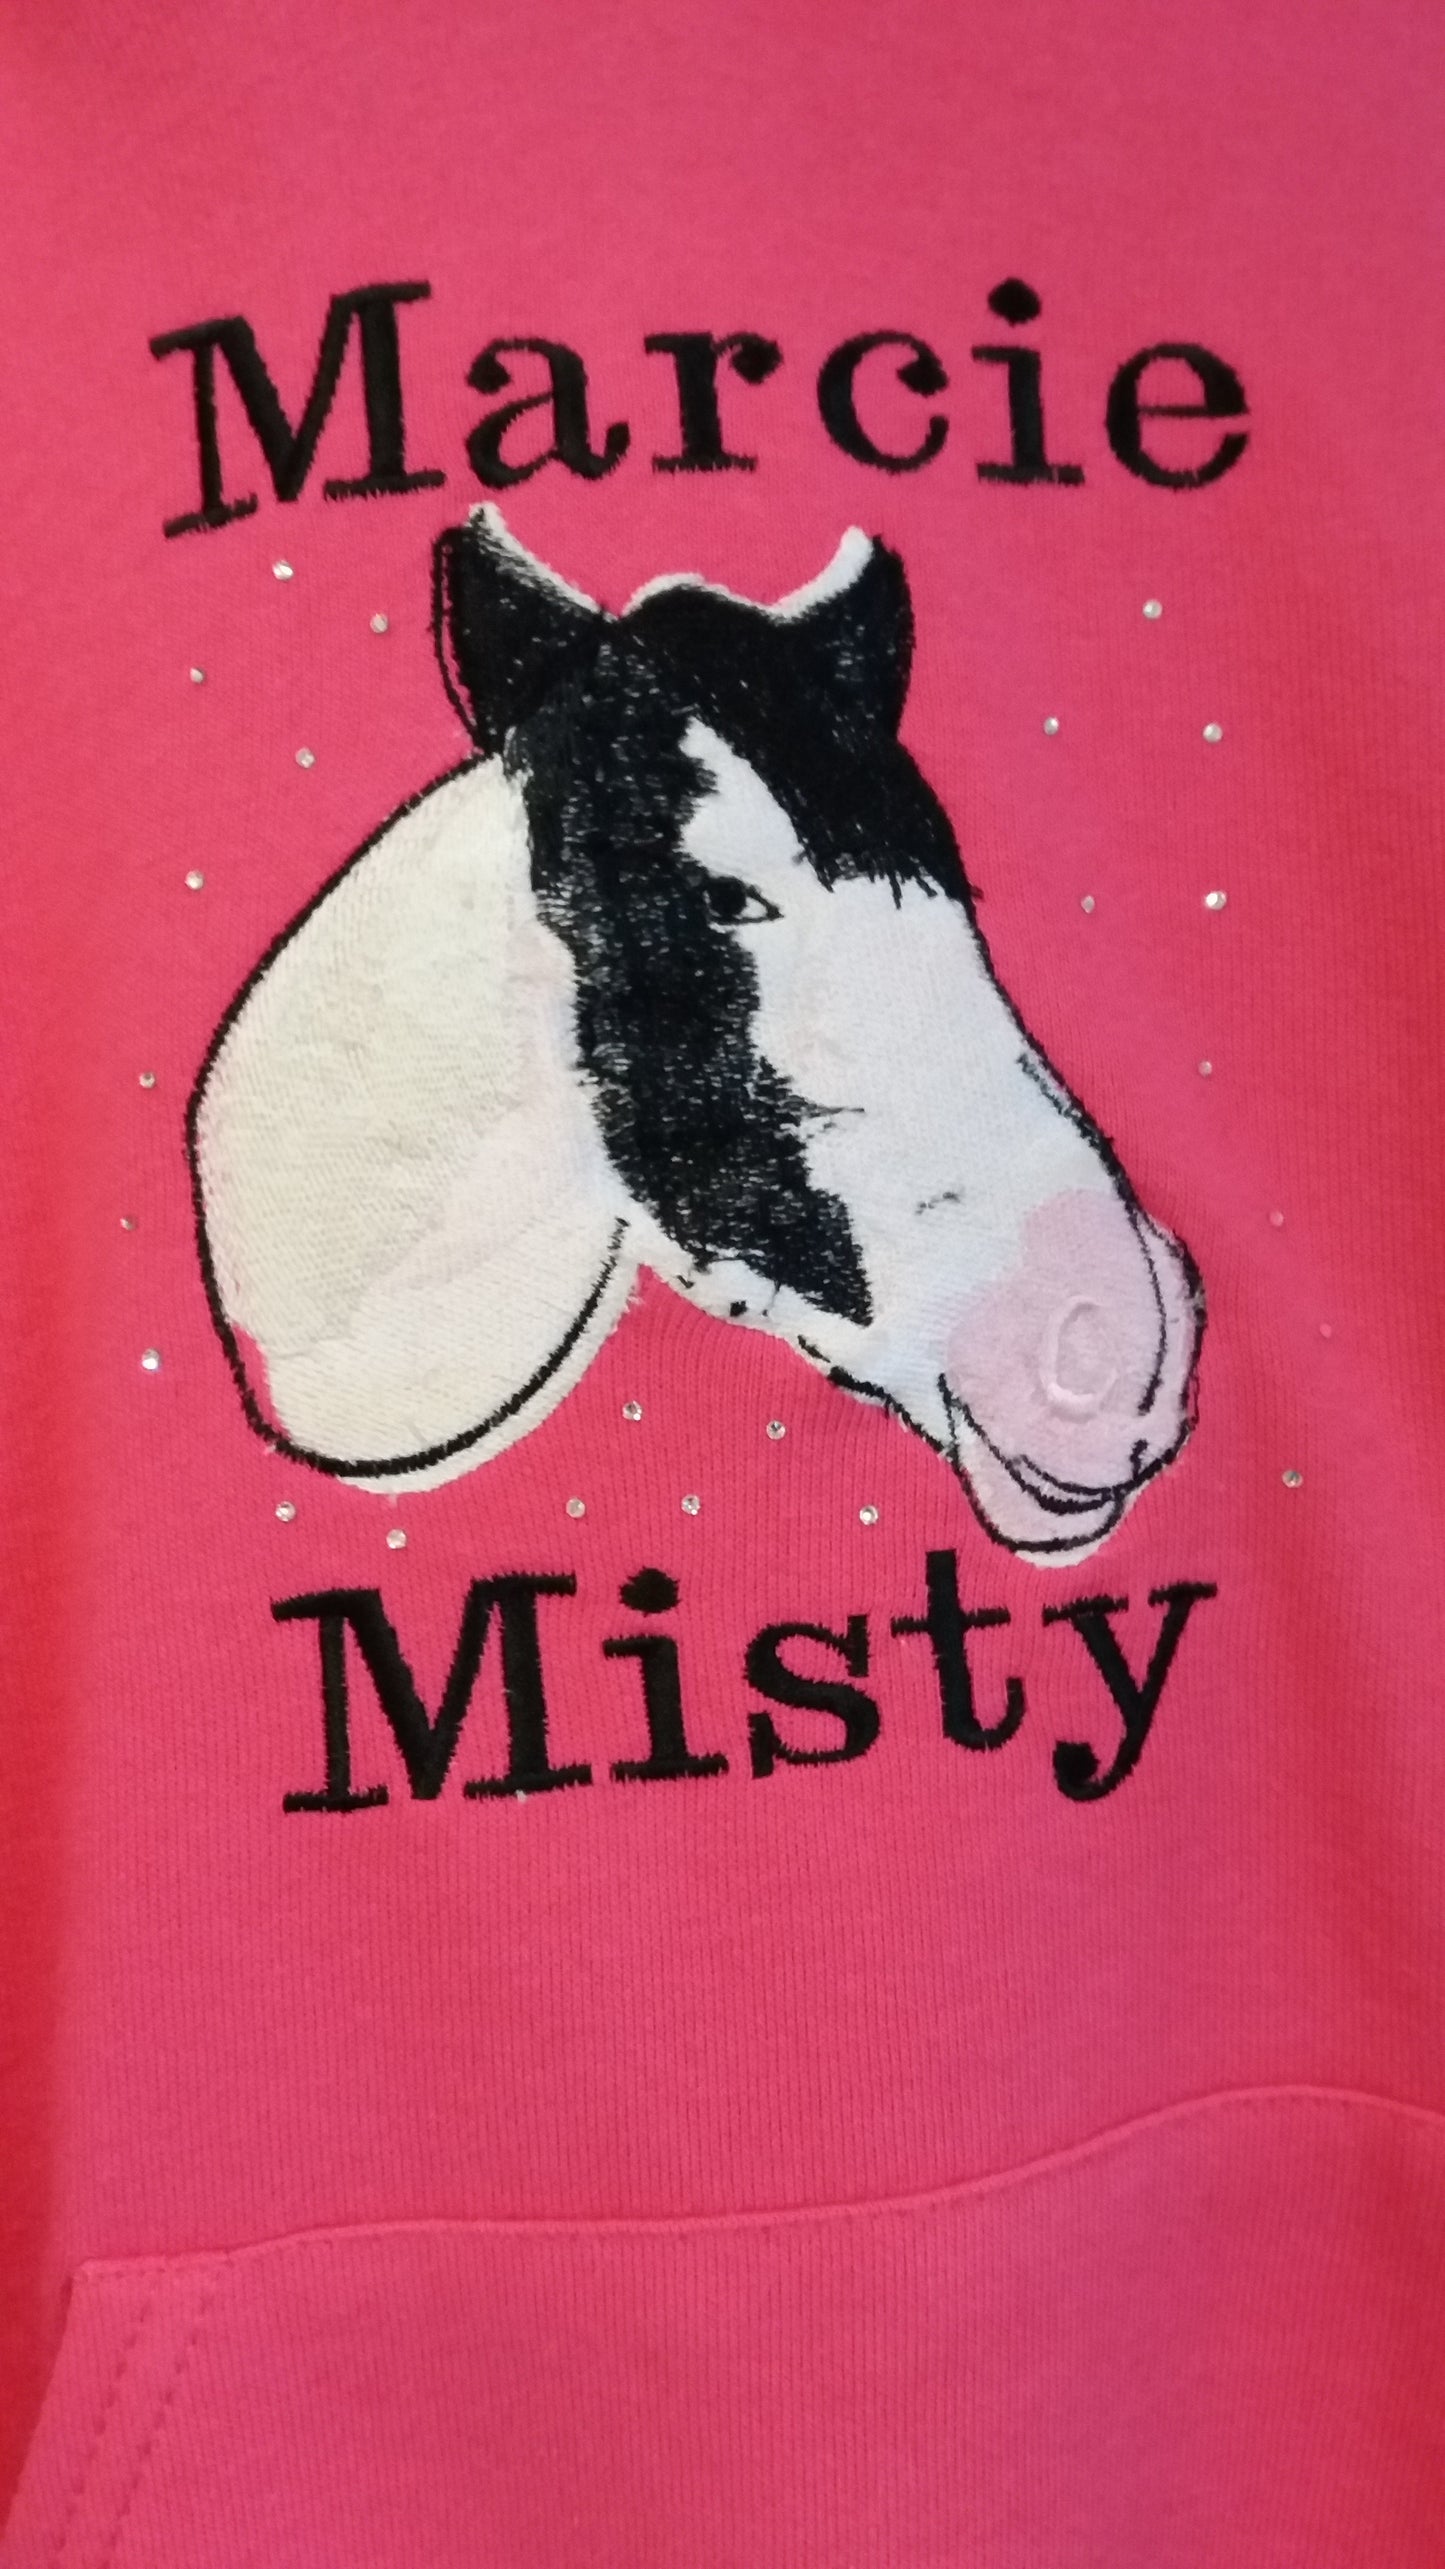 Personalised Horse hoodie (adult size ): horse photo embroidery